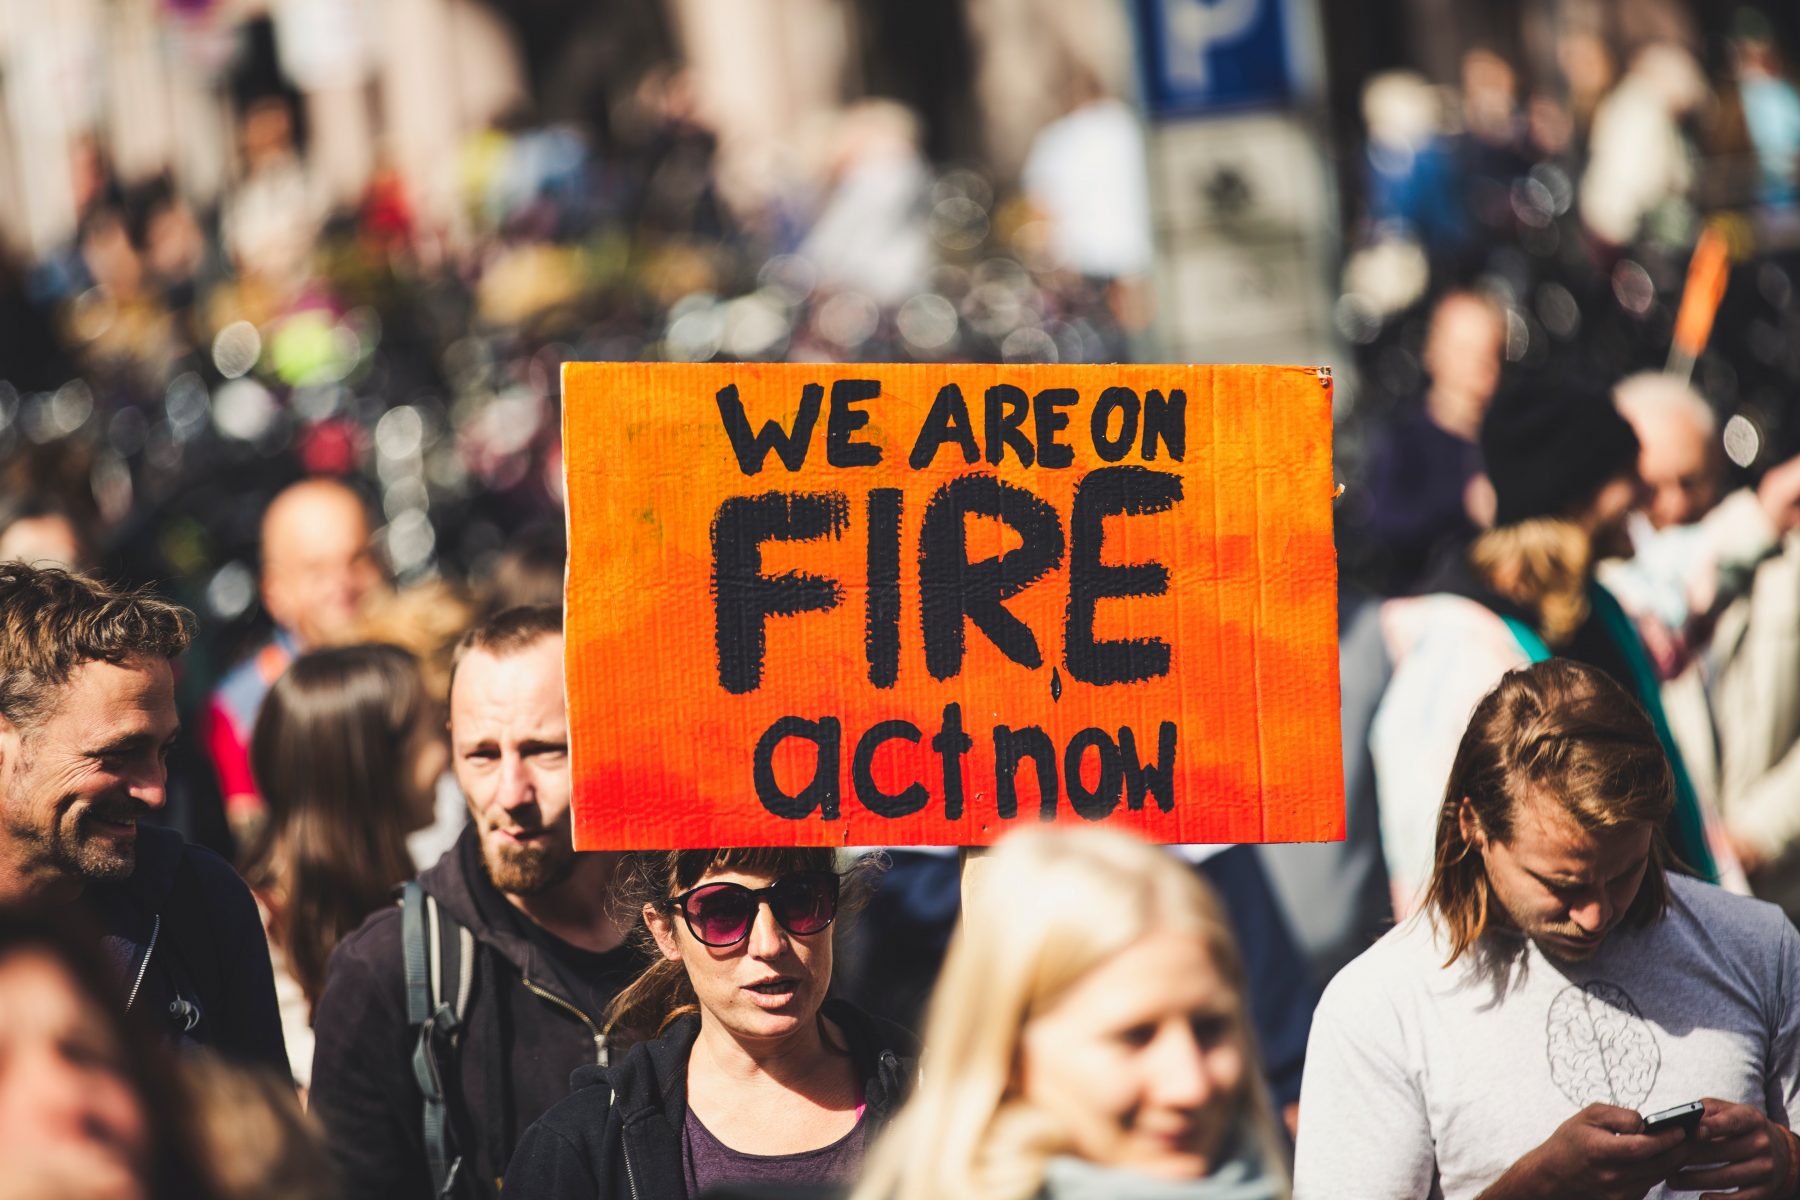 A young woman, at a climate change rally, holding a placard that says "We are on fire act now."